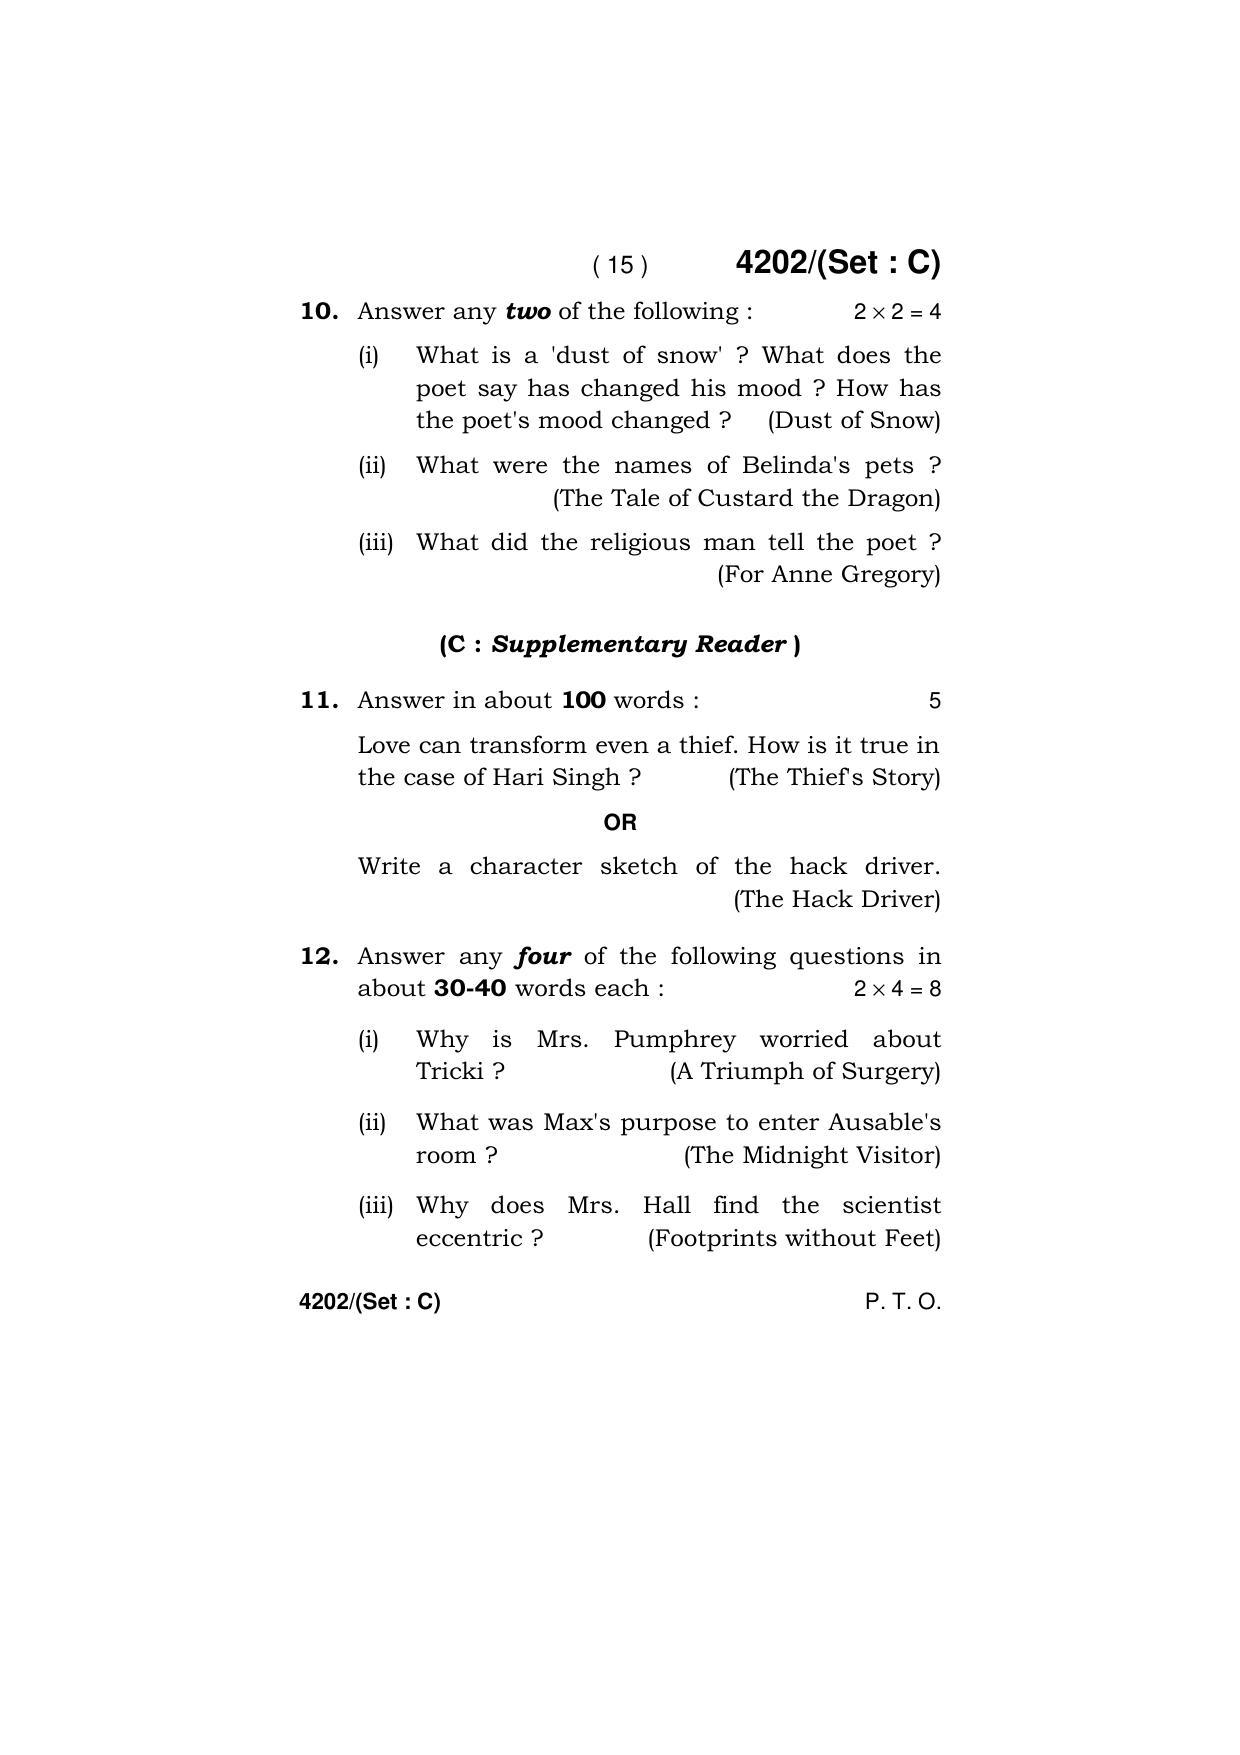 Haryana Board HBSE Class 10 English (All Set) 2019 Question Paper - Page 47